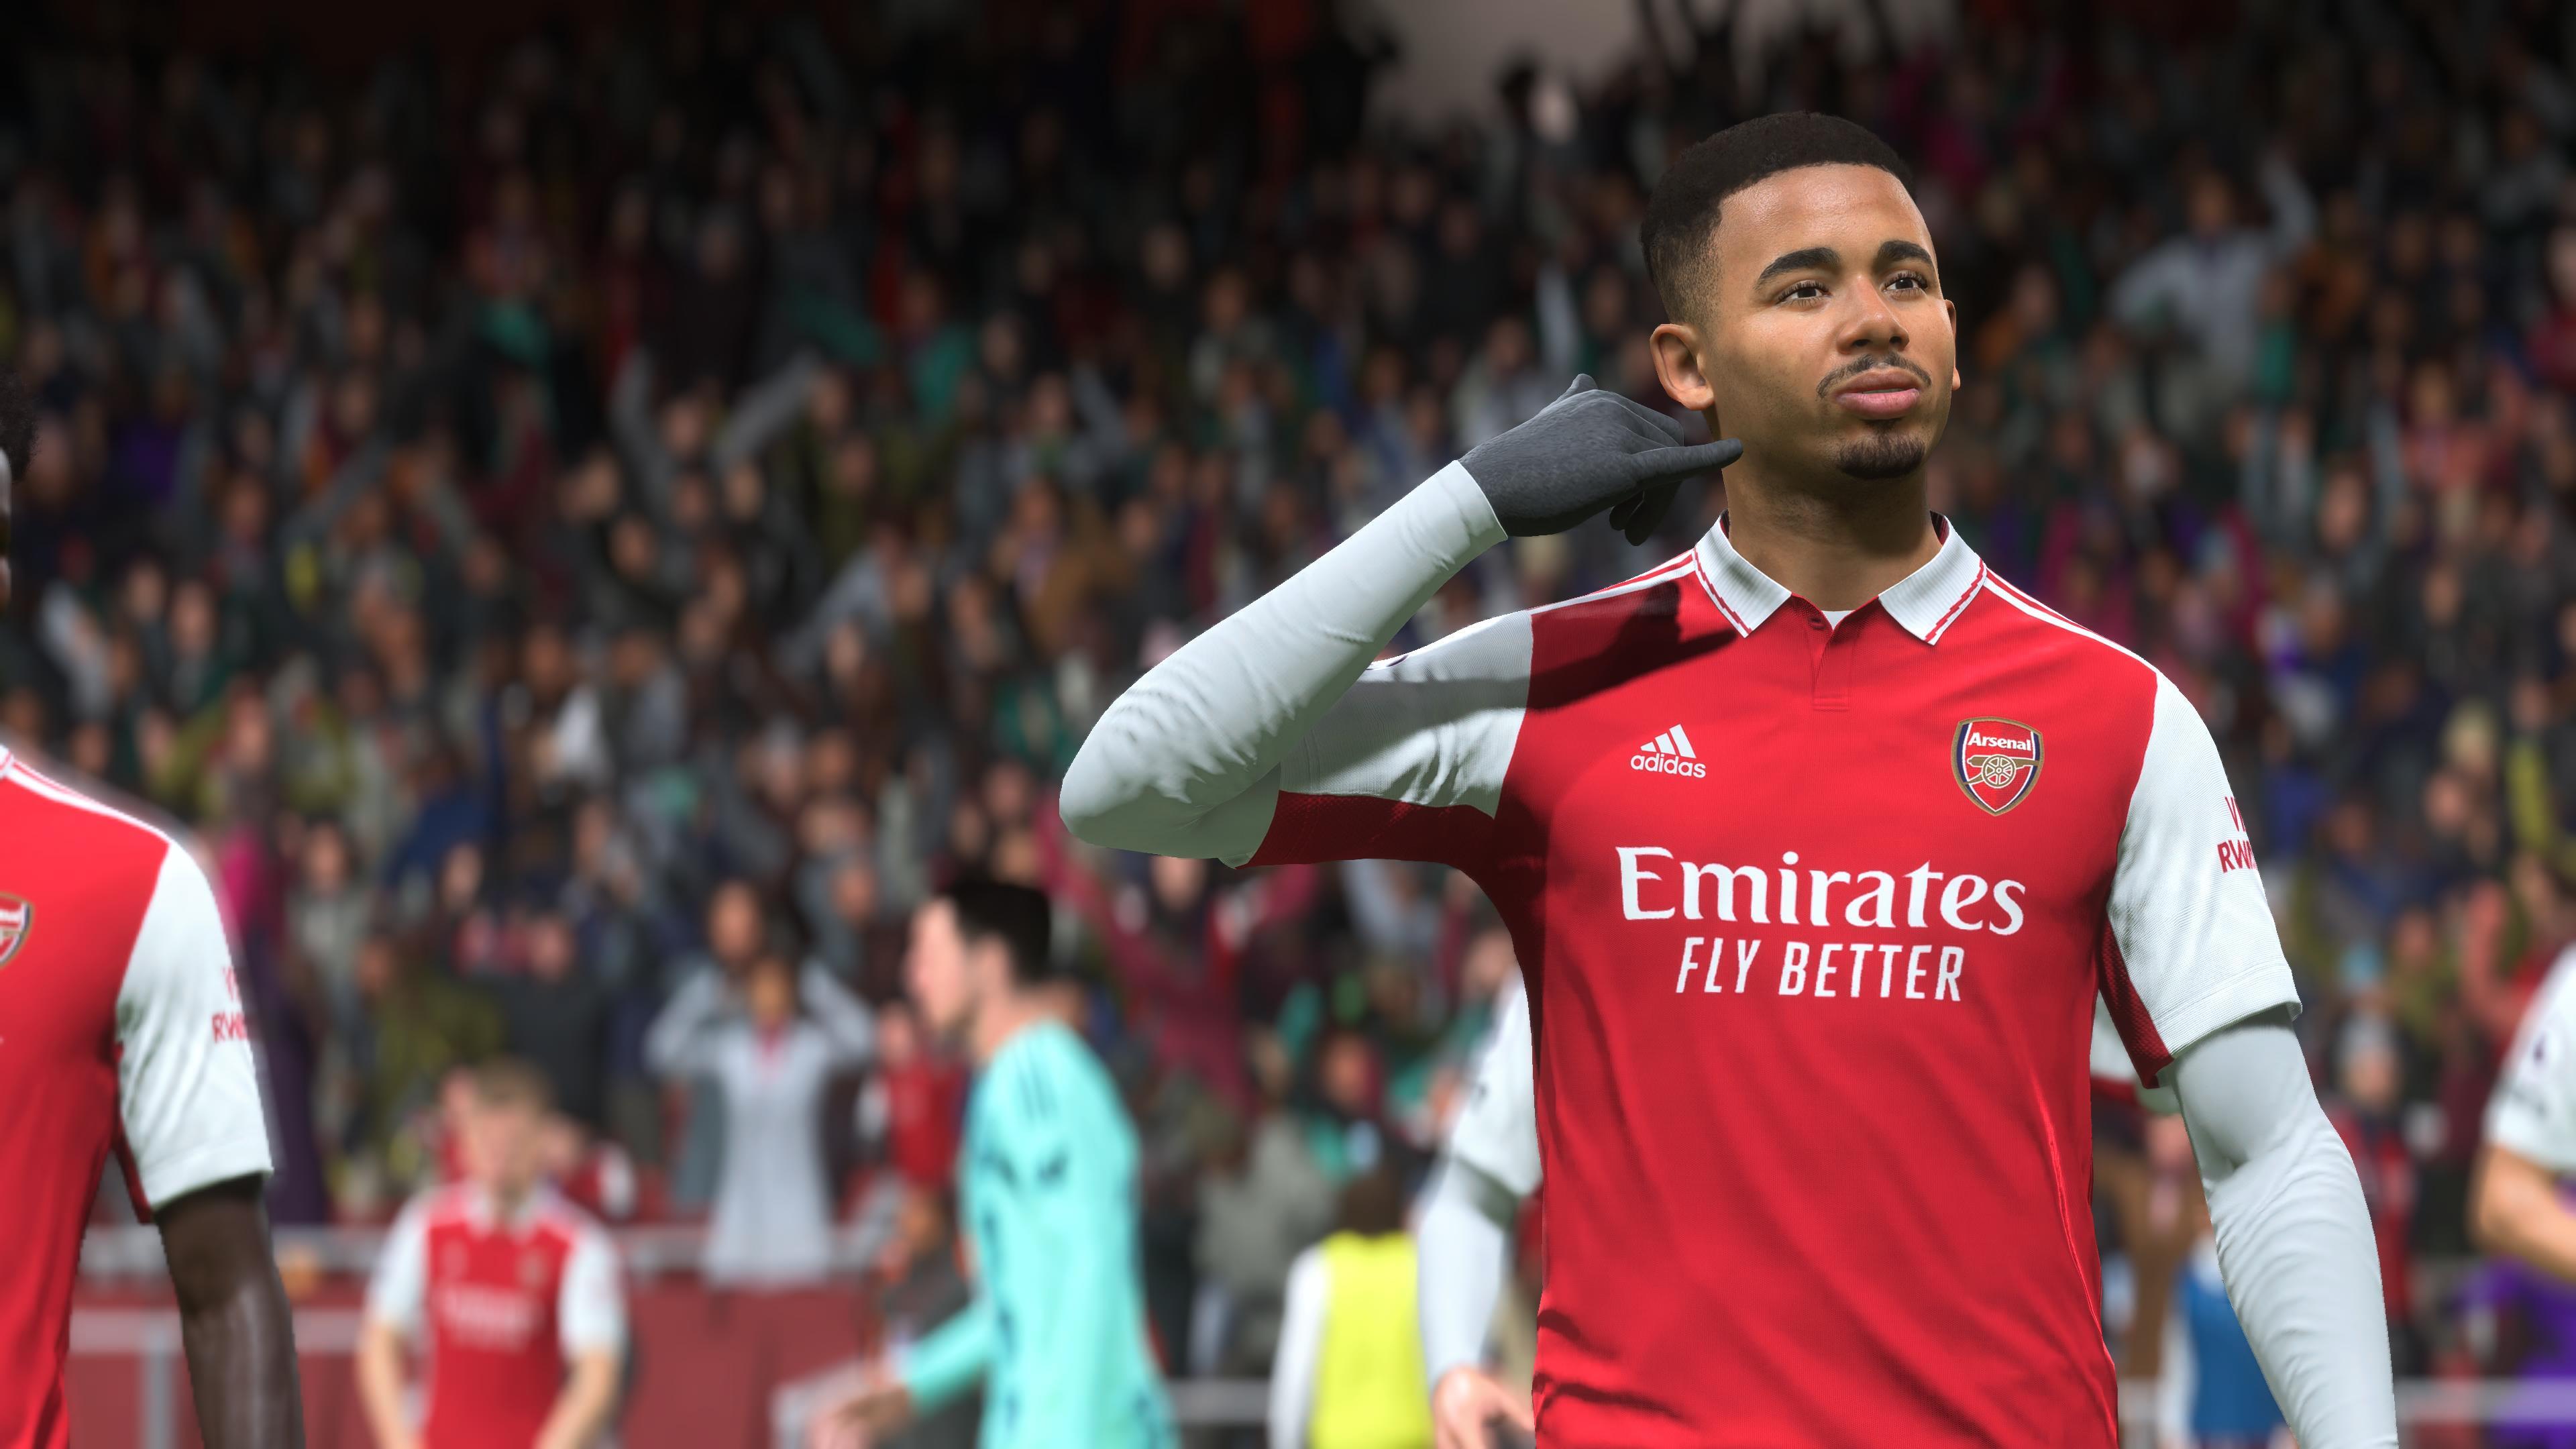 FIFA 23 Review - Sorry Ted, I Don't Believe